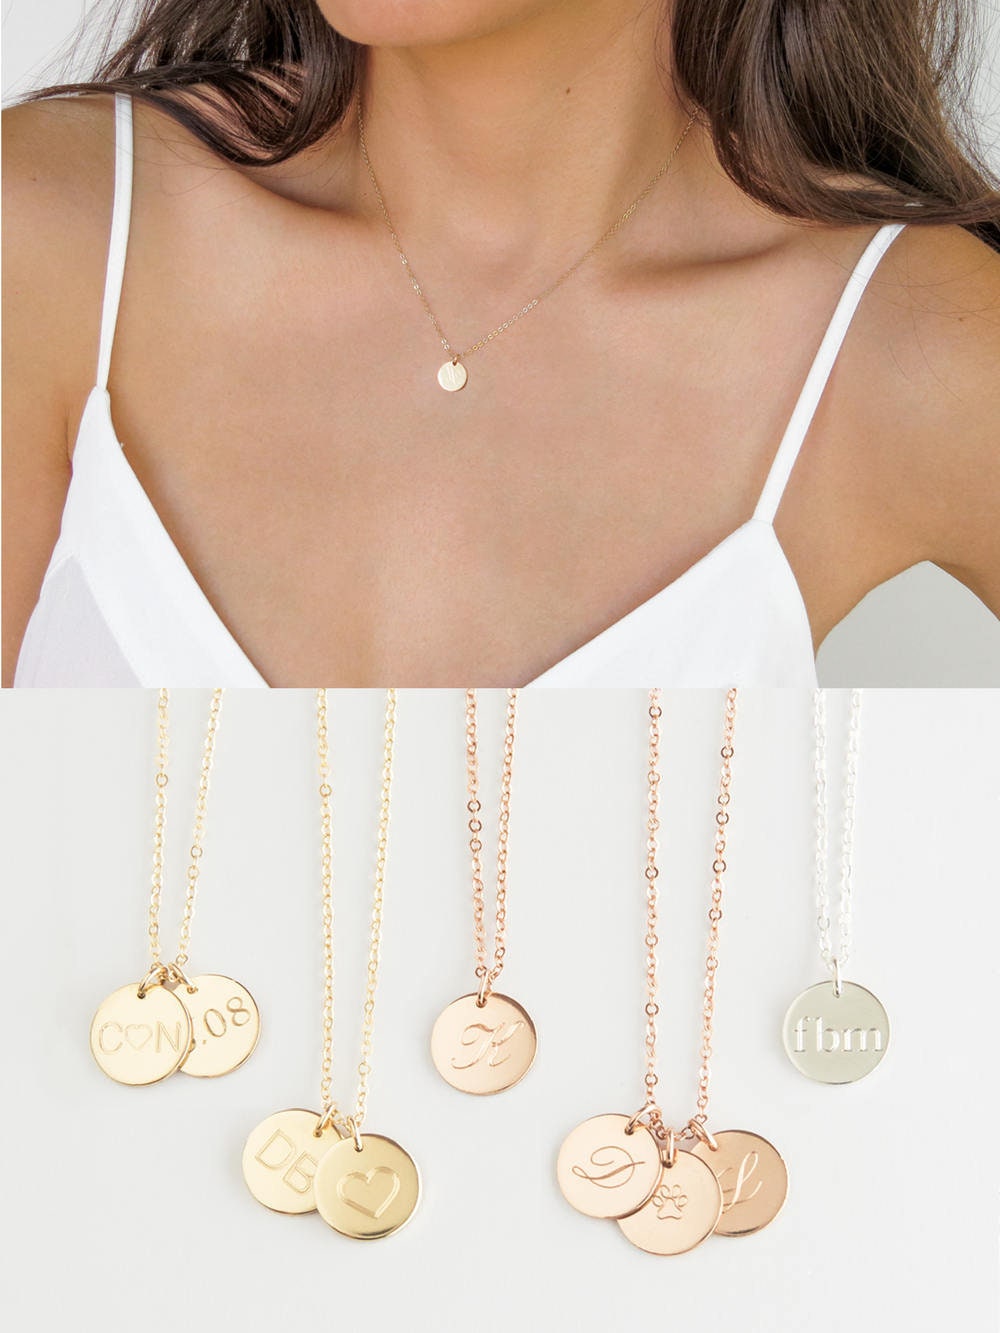 Personalized Toggle Necklace with Monogram Initials Charm - Large Link  Chain Necklace - Sterling Silver, Yellow Gold or Rose Gold